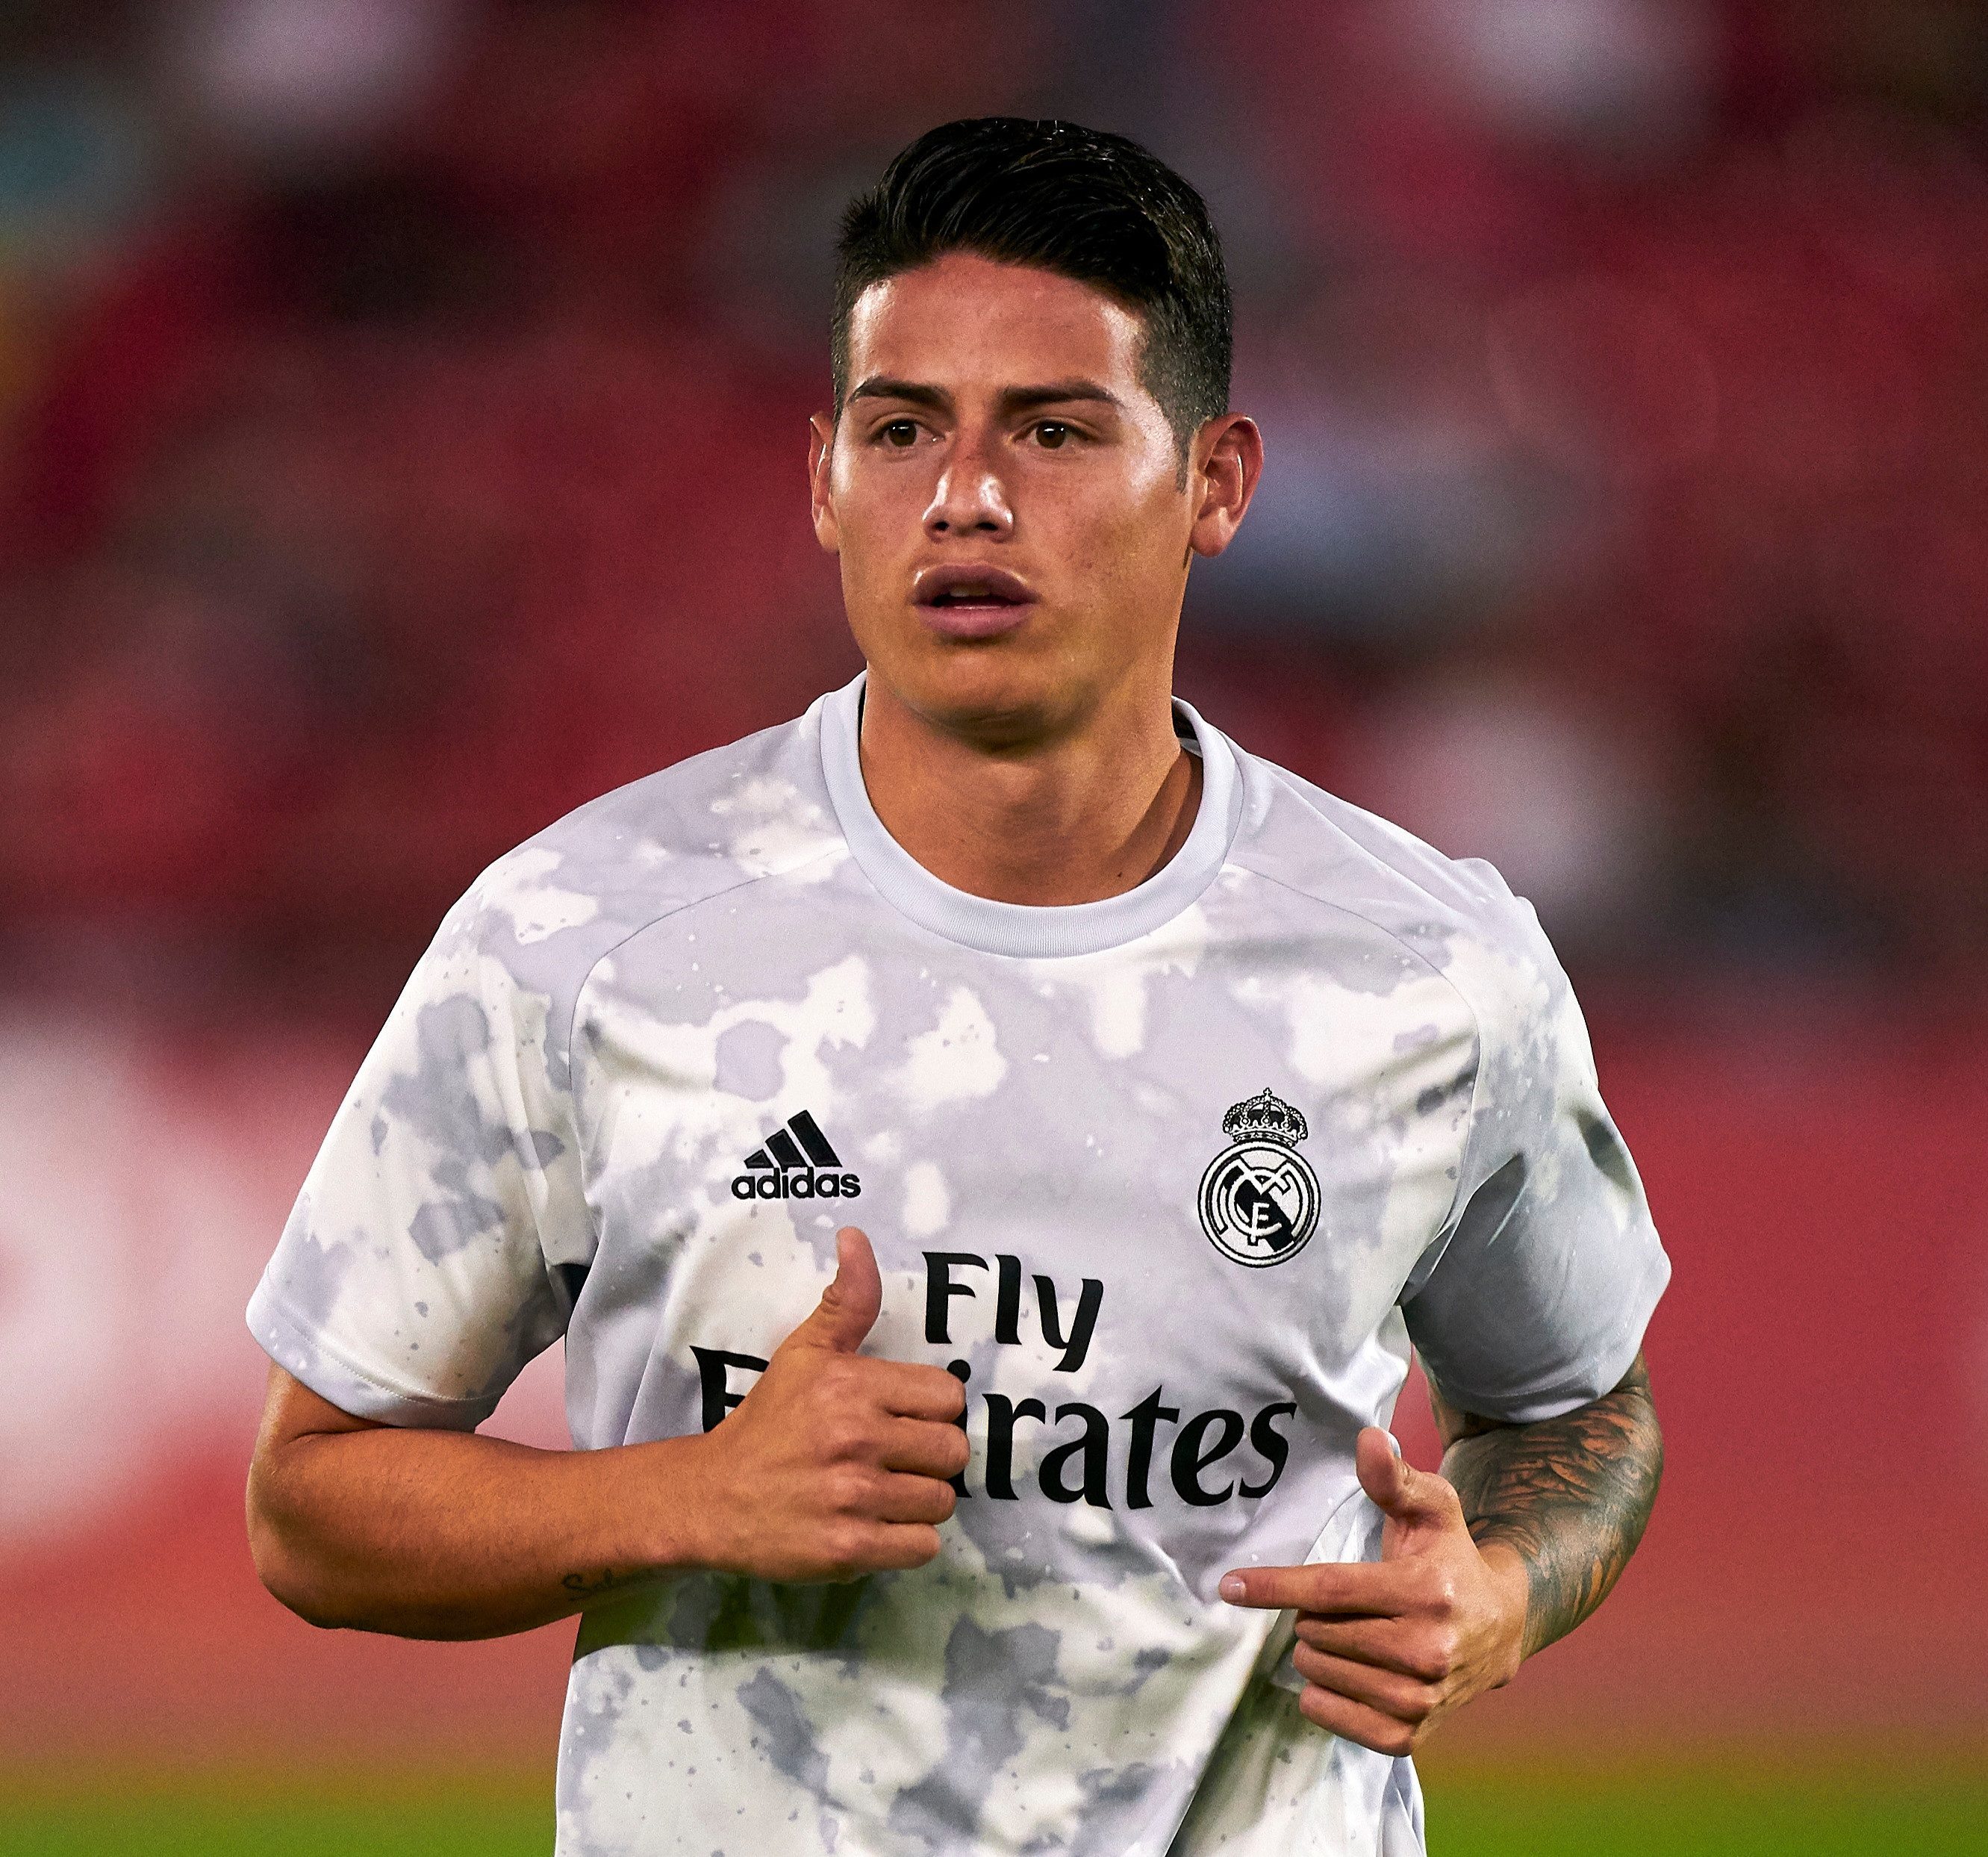 Real Madrid: Could James Rodriguez be reunited with Carlo Ancelotti? - Bóng Đá